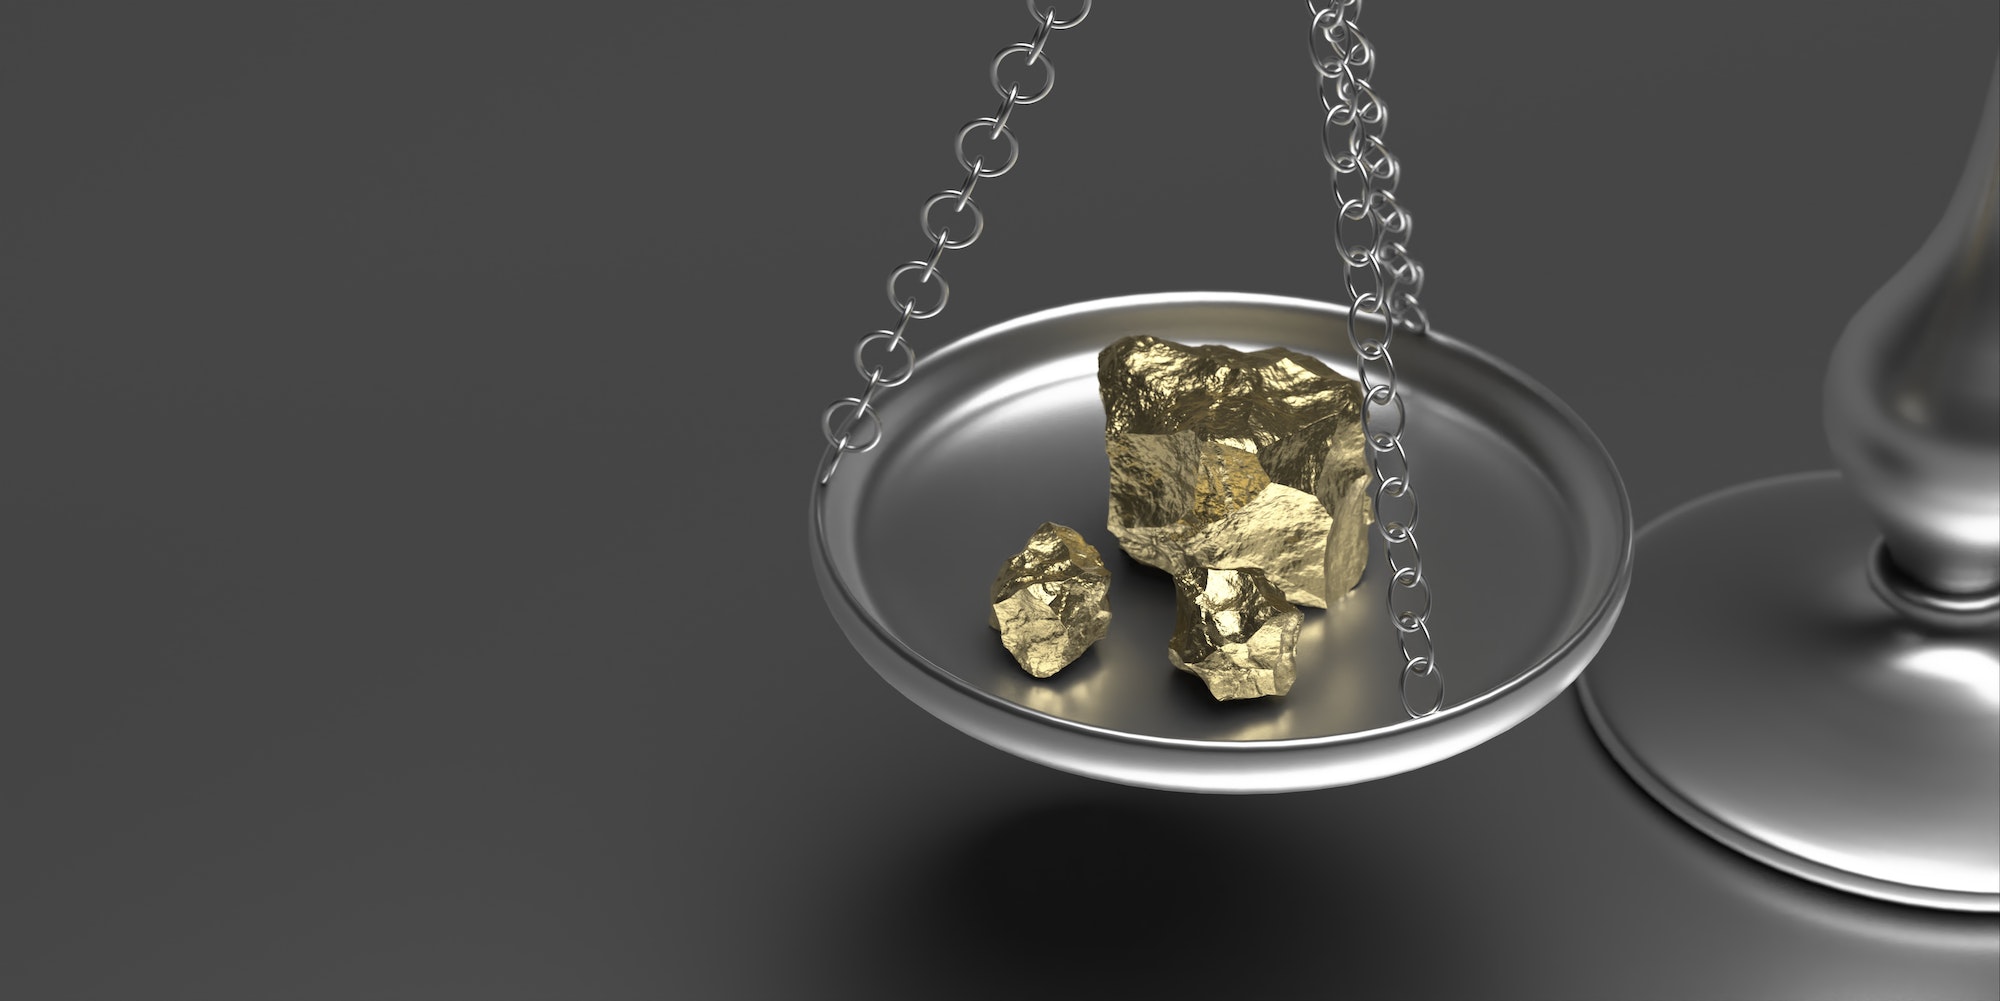 Gold rock scale weighs gold nuggets on grey background. 3d illustration